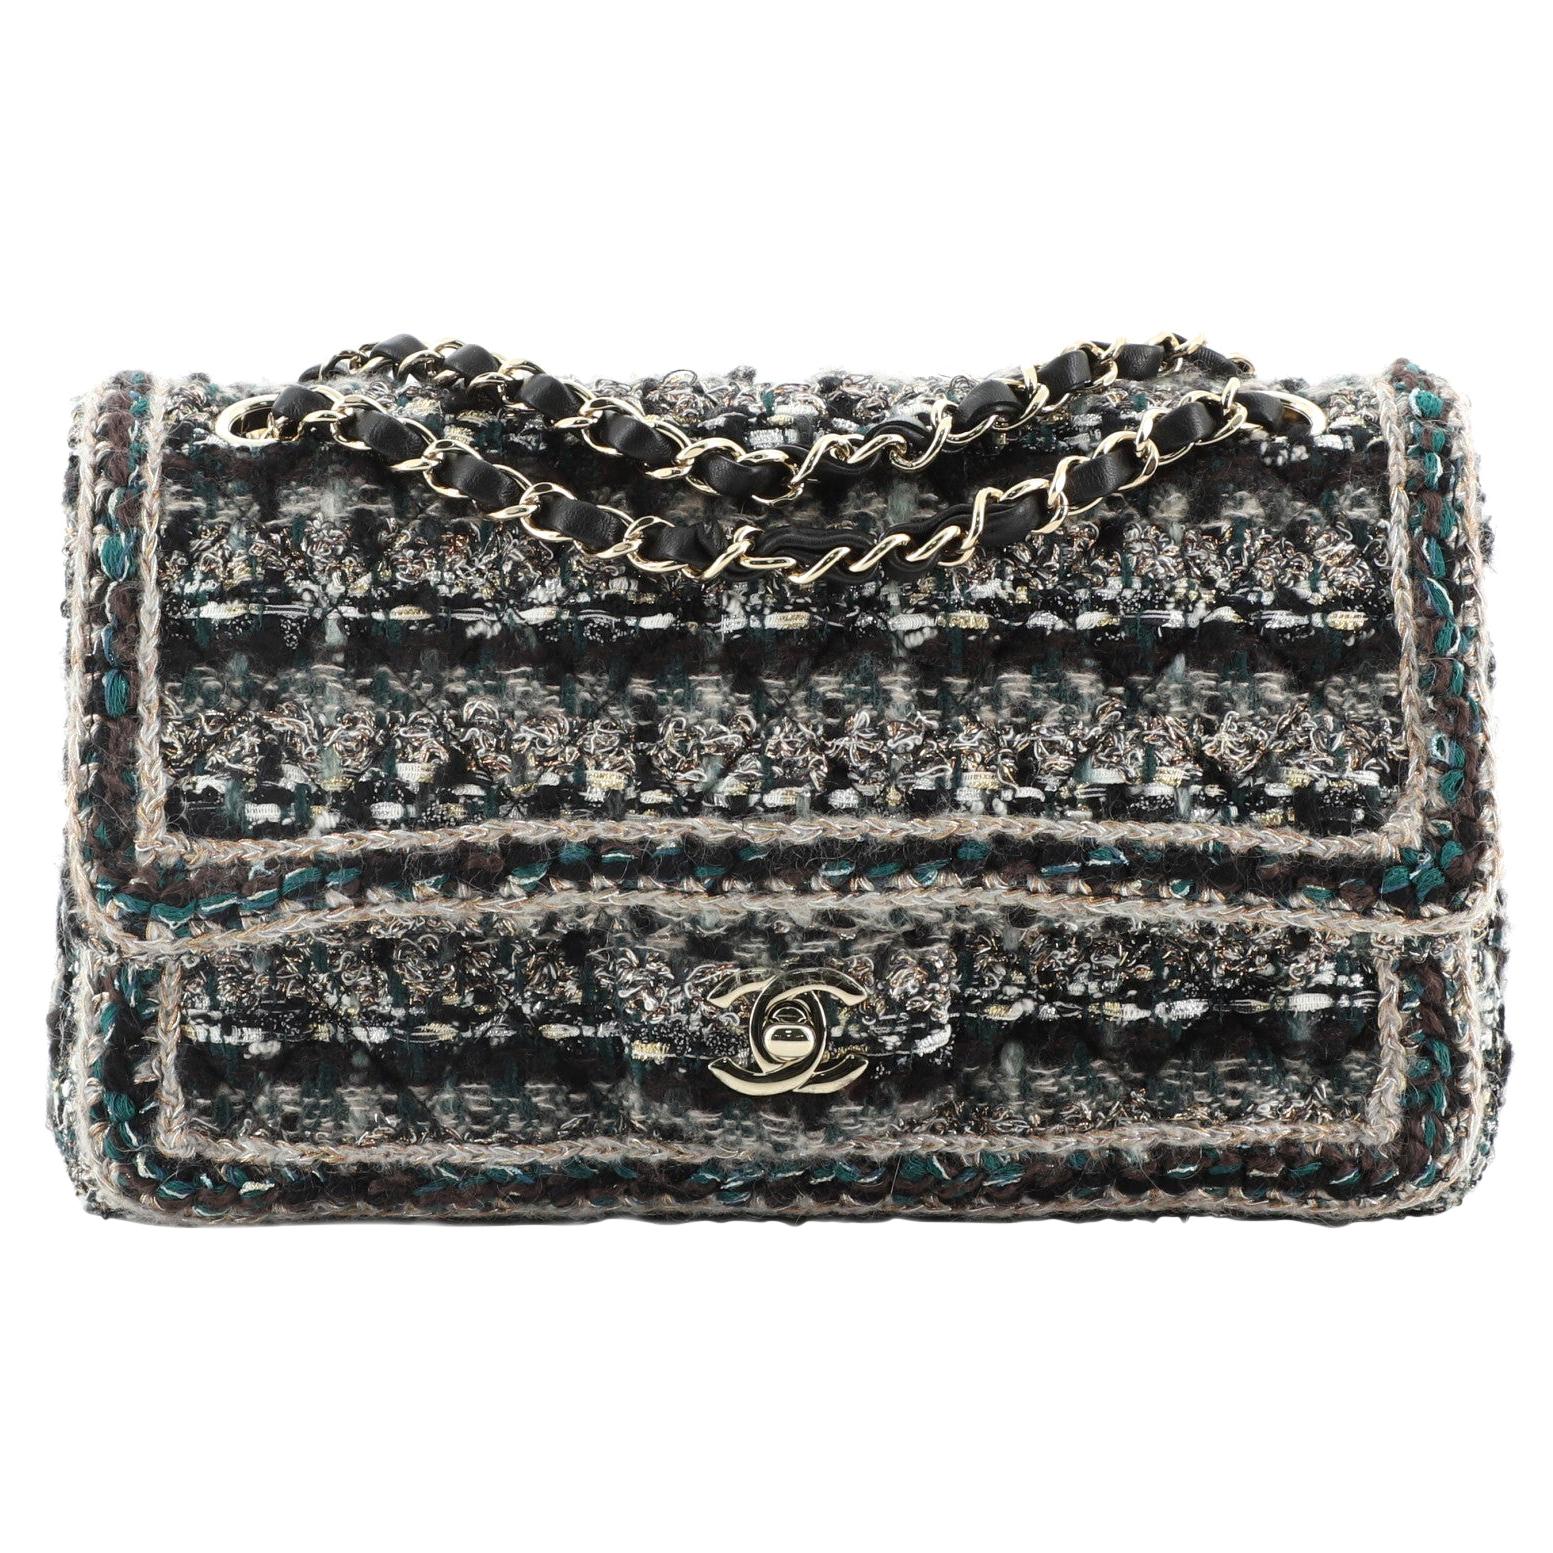 CHANEL Tweed JUMBO Bag Timeless Multicolour - Chelsea Vintage Couture